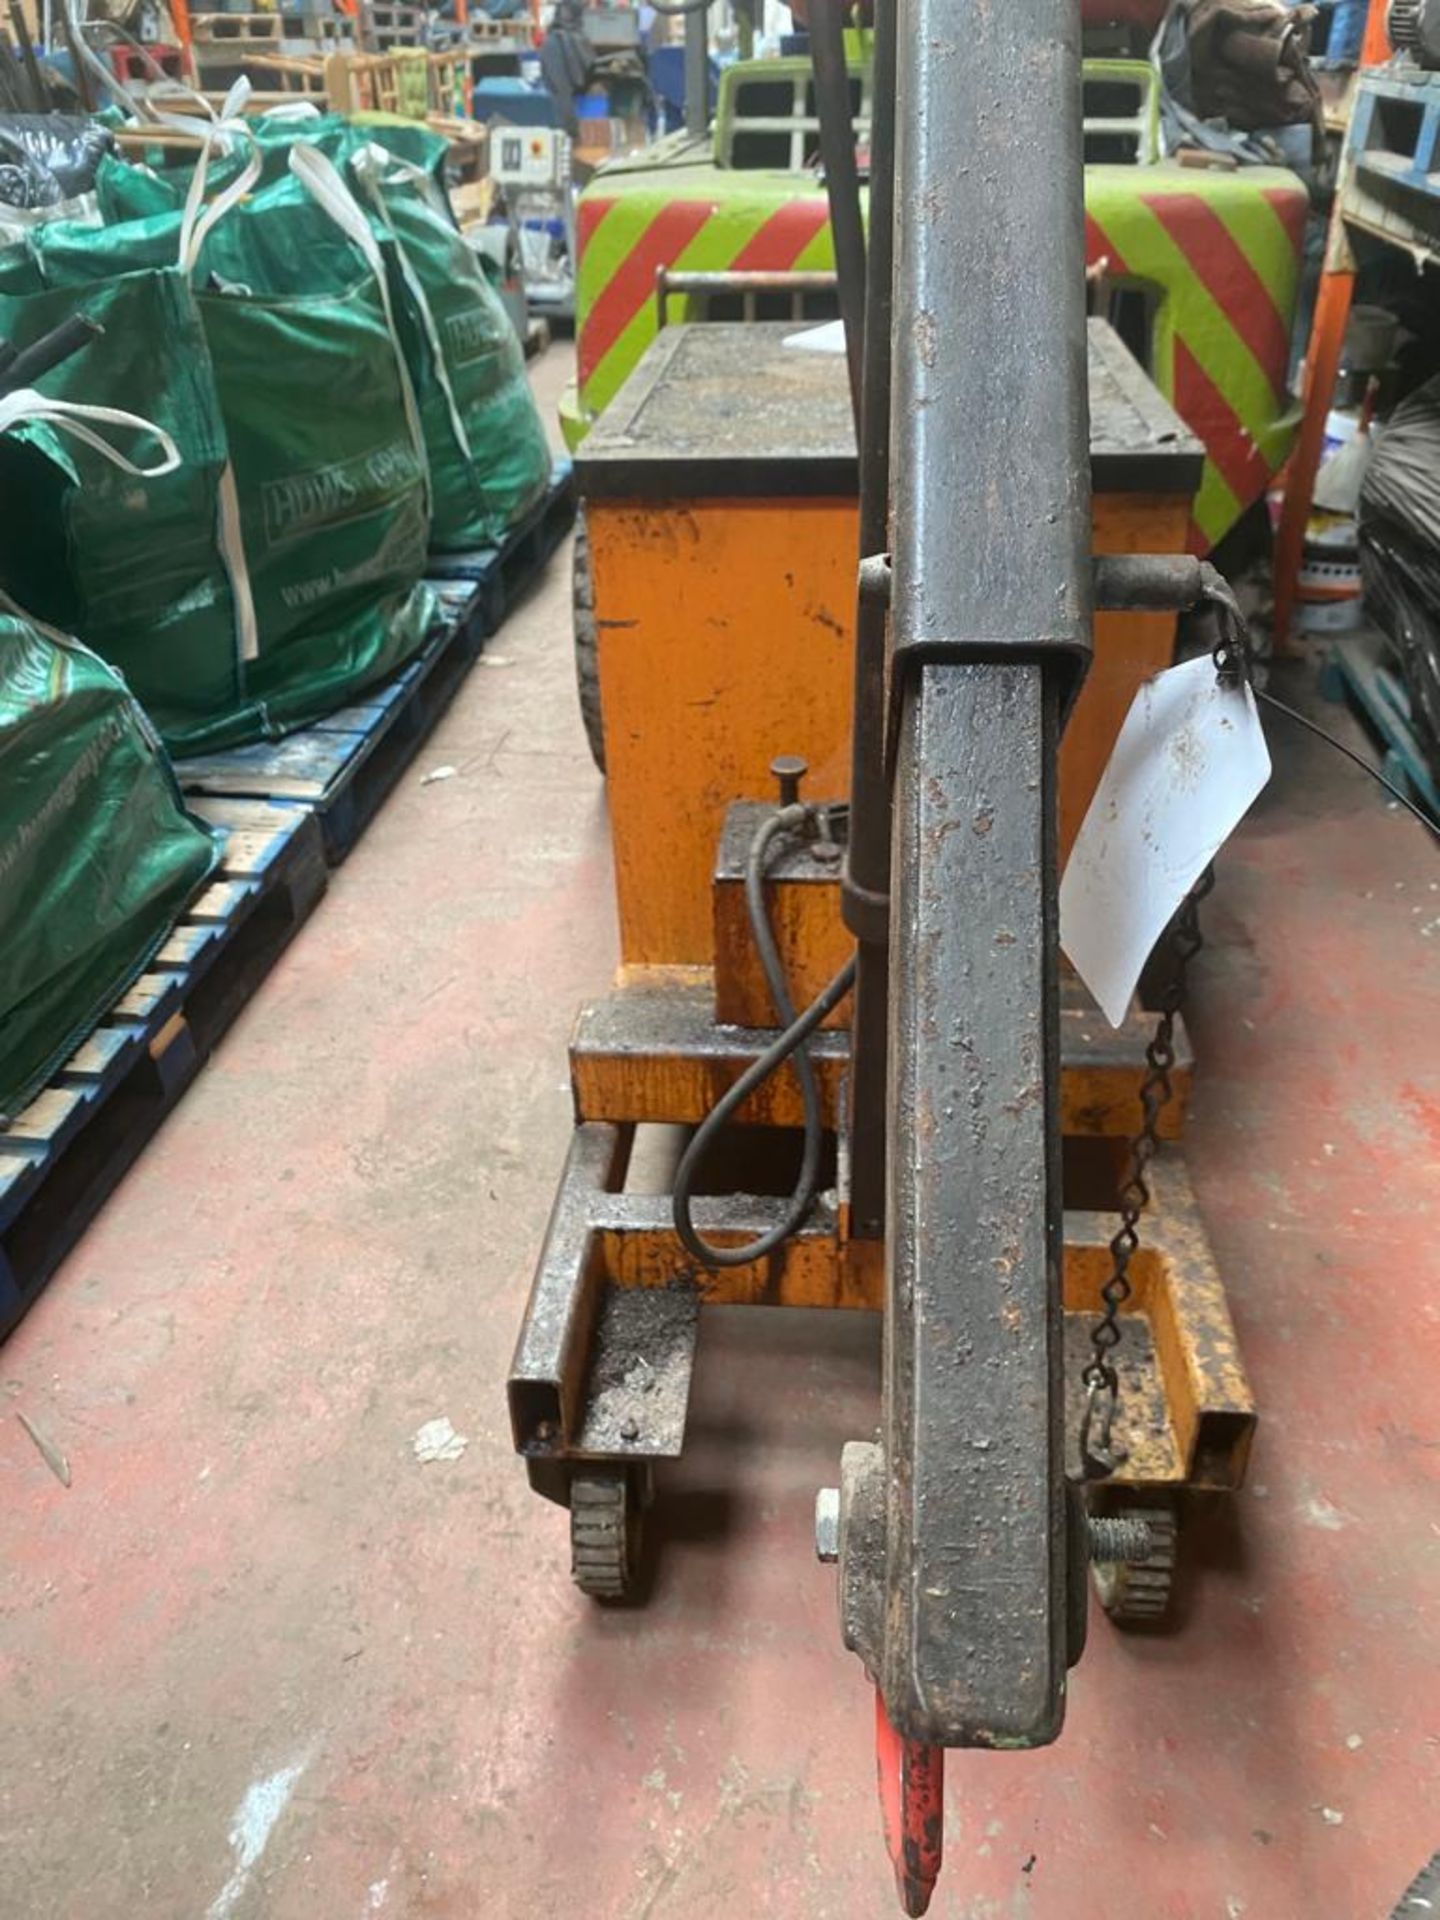 Hydraulic Lifting Platform, 508kg max swl. Lot located in Bradford, West Yorkshire. Loading free - Image 2 of 3